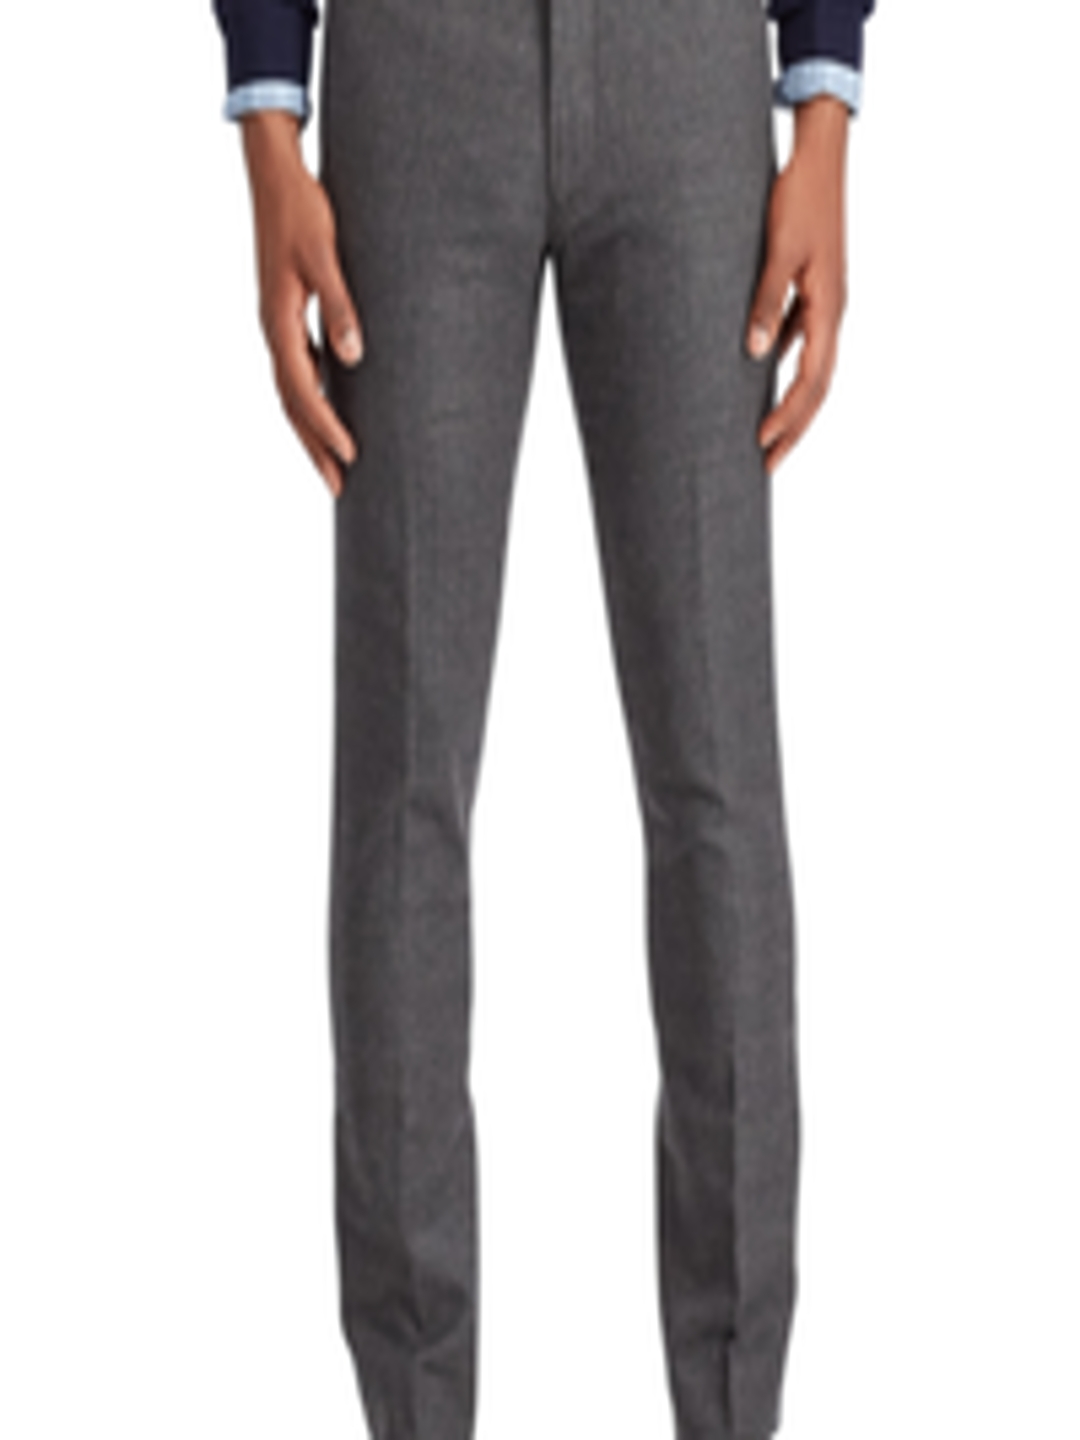 Buy Polo Ralph Lauren Stretch Slim Plaid Wool Pant - Trousers for Men